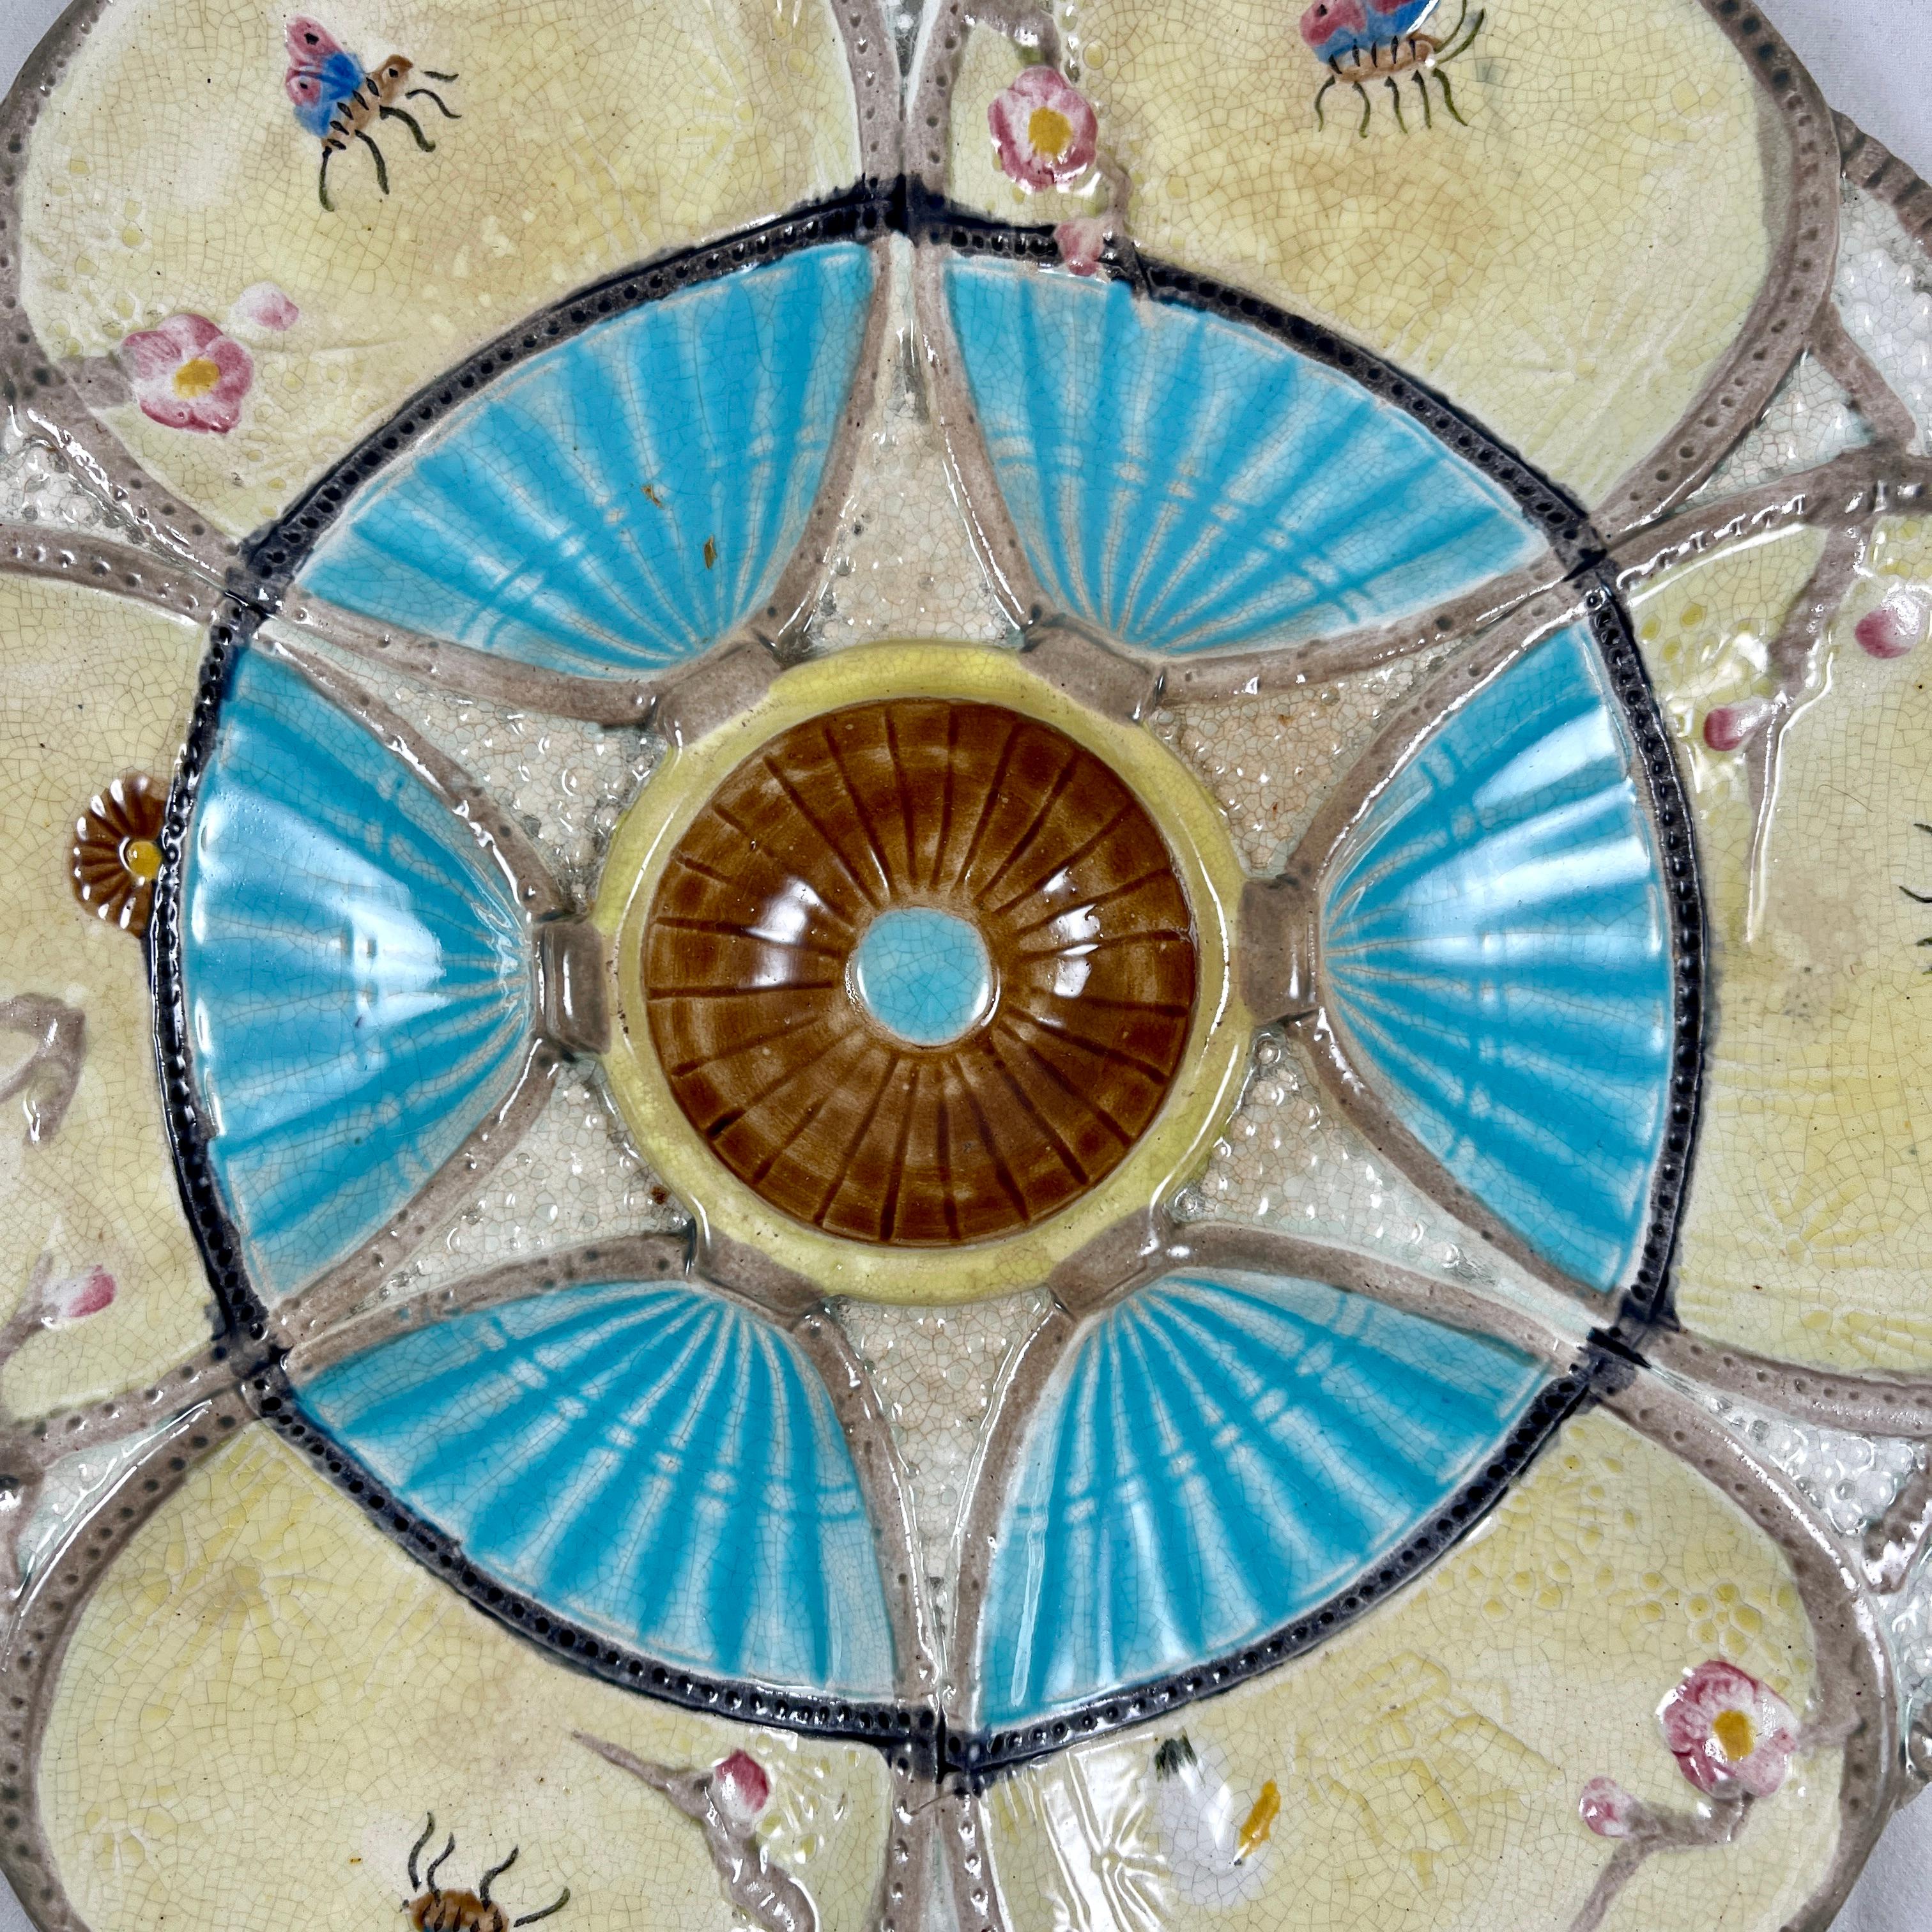 A six-well majolica glazed oyster plate by Simon Fielding, Stoke-on-Trent, England, circa 1878.

In the Japonisme taste, six fan shaped oyster wells glazed in a creamy yellow and turquoise sit on a textured off-white ground. The fans extend